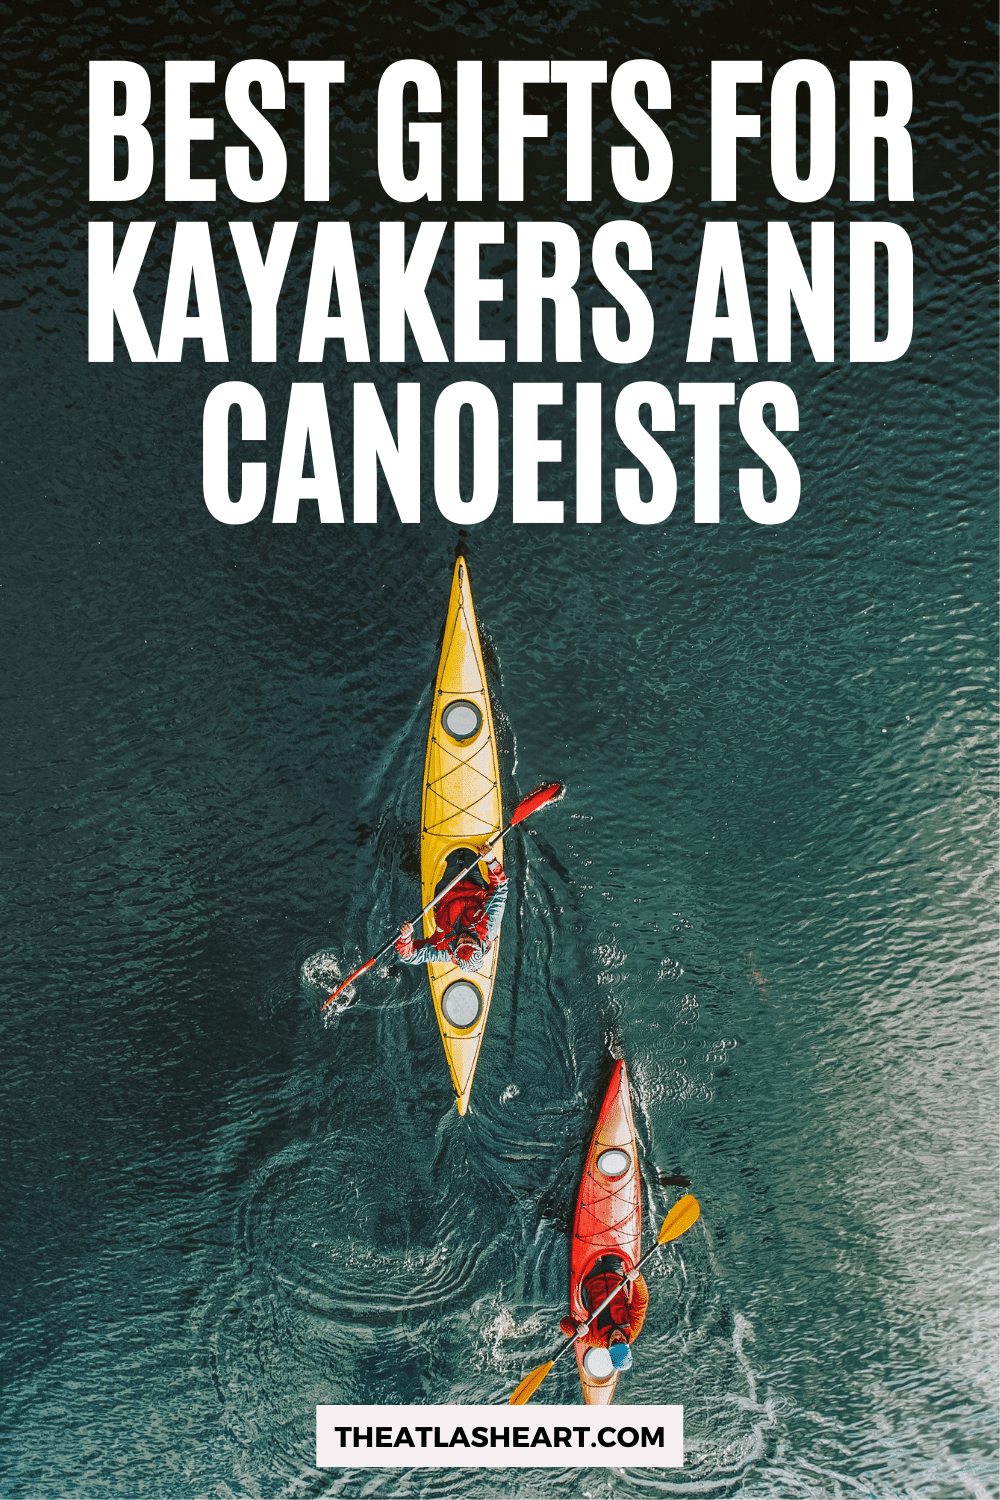 31 Best Gifts for Kayakers and Canoeists (2022 Gift Guide)